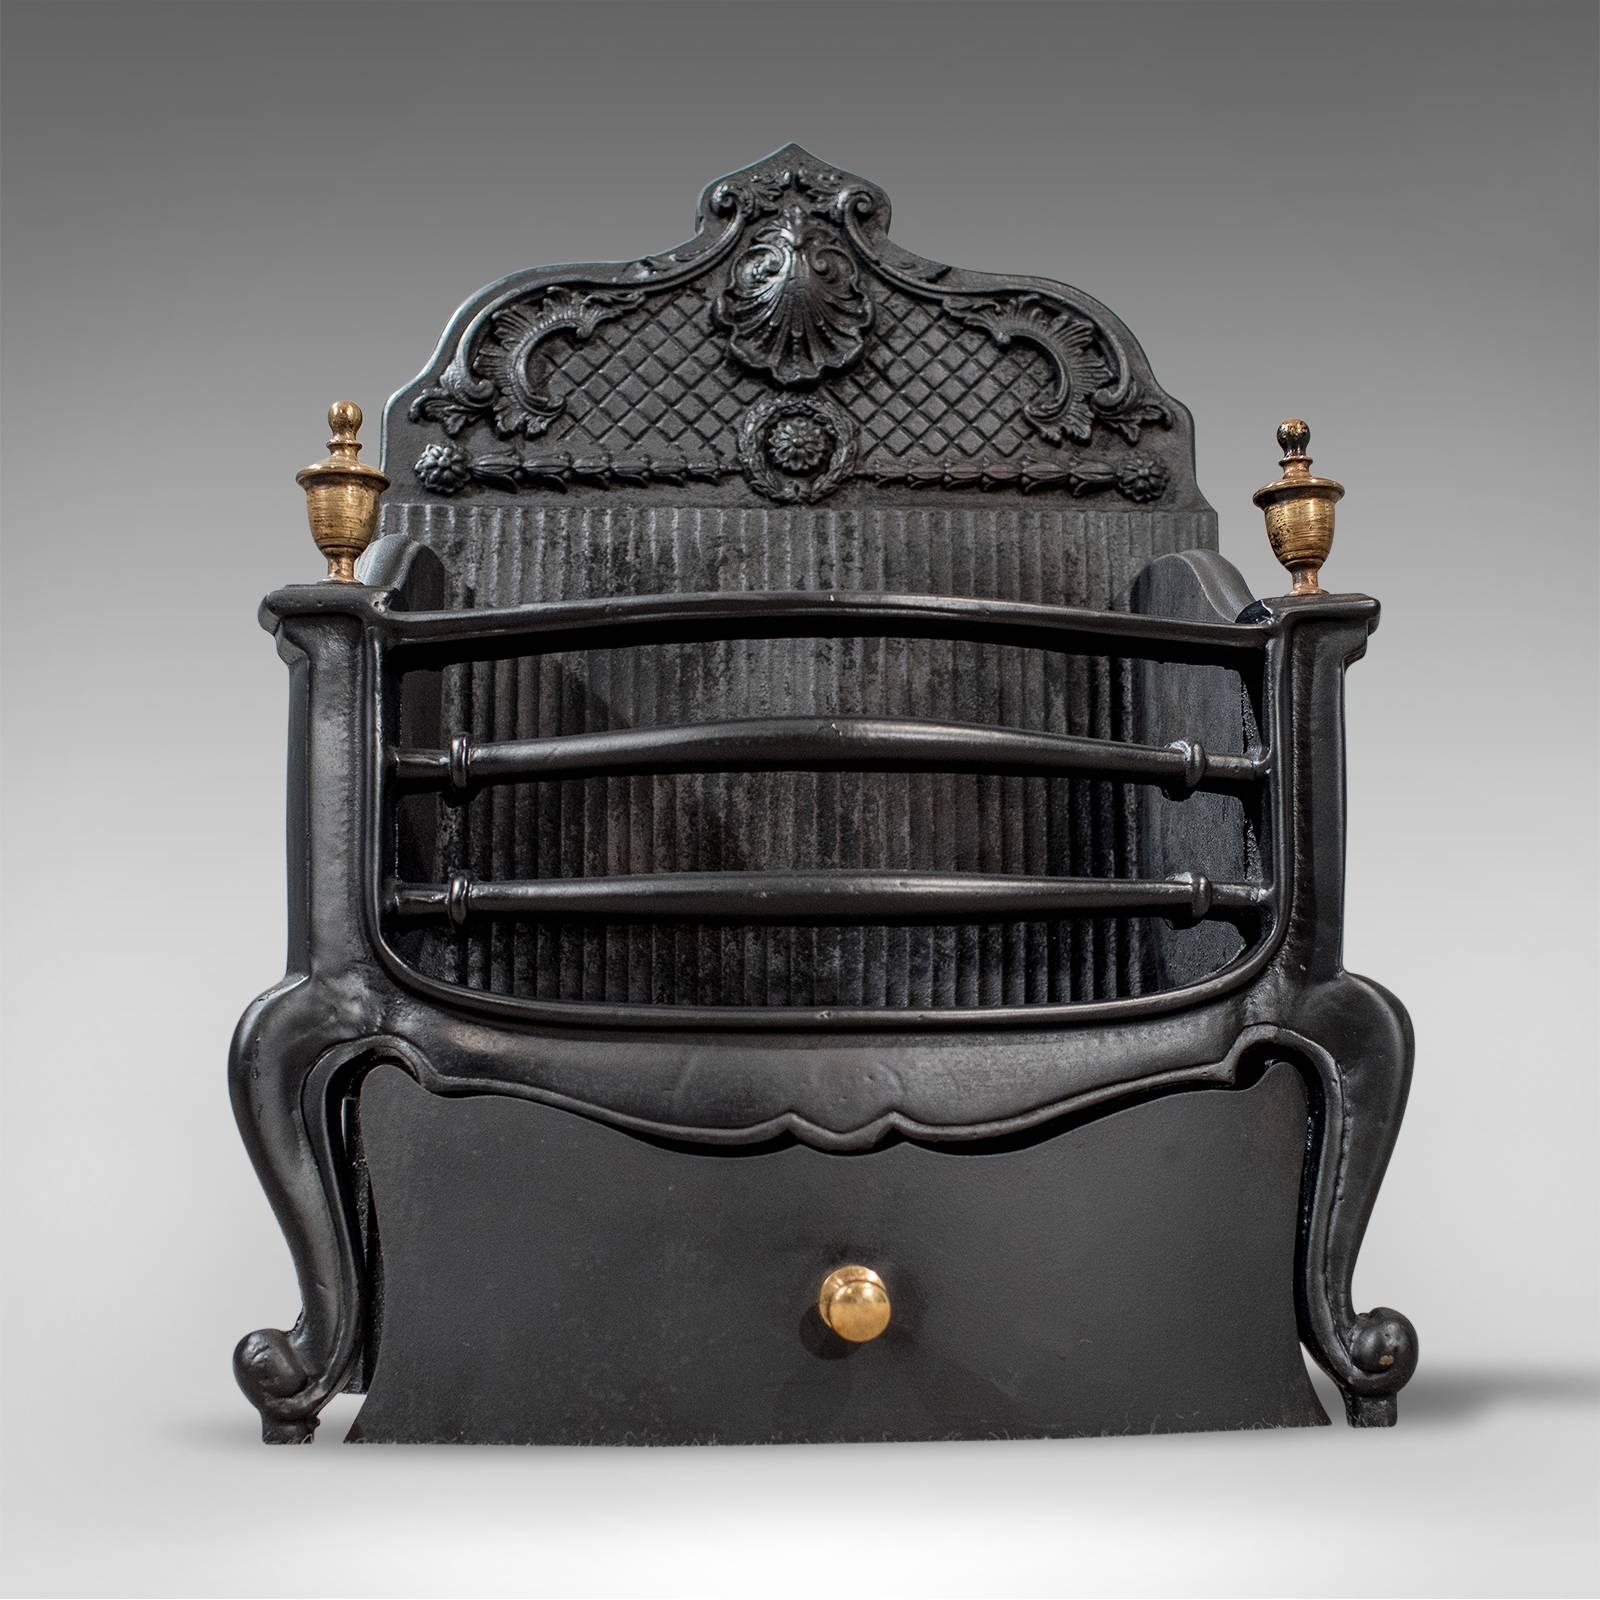 Early 20th Century Antique Cast Iron Fire Grate Freestanding Basket English Victorian, circa 1900